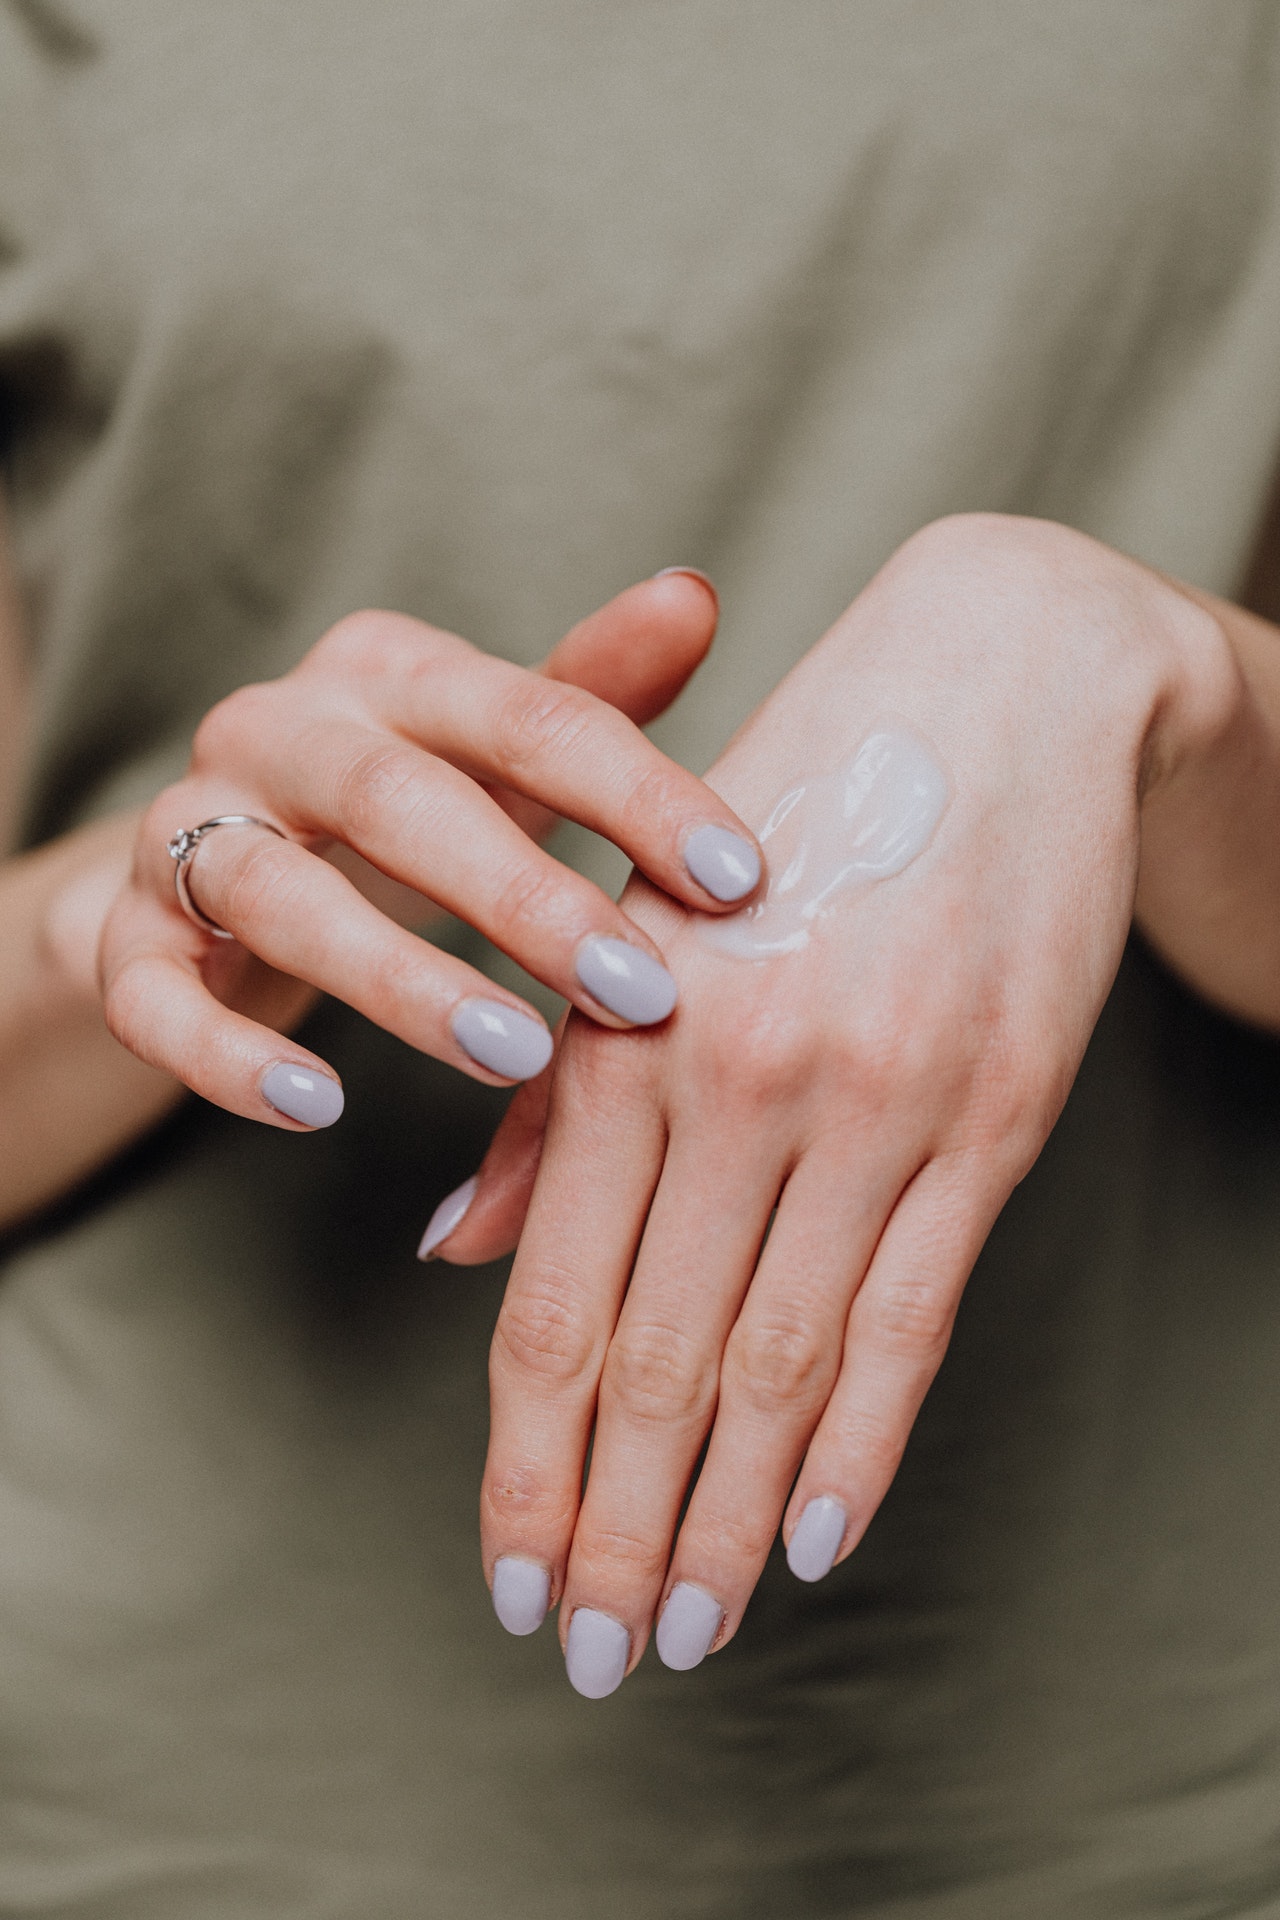 What results will regular hand care give?